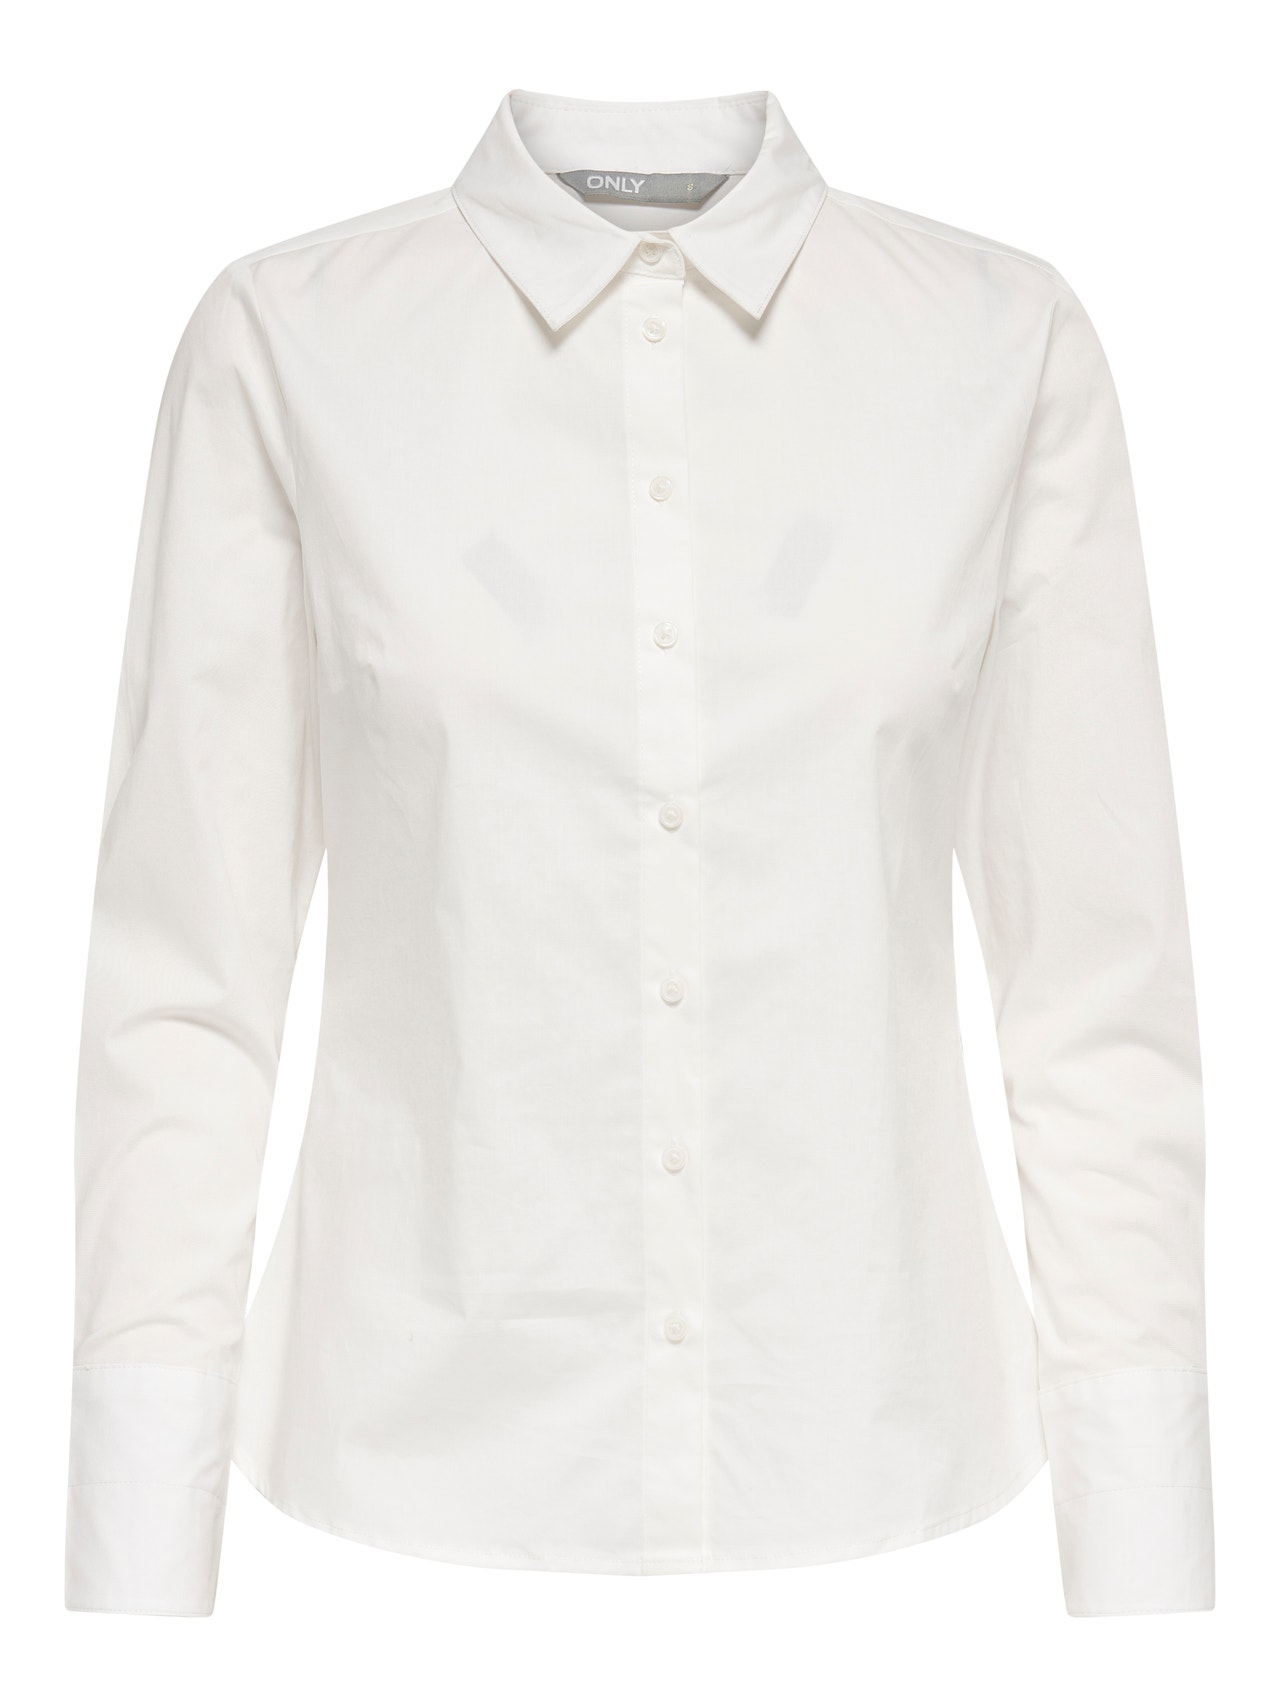 ONLY Clásico Camisa -White - 15270350